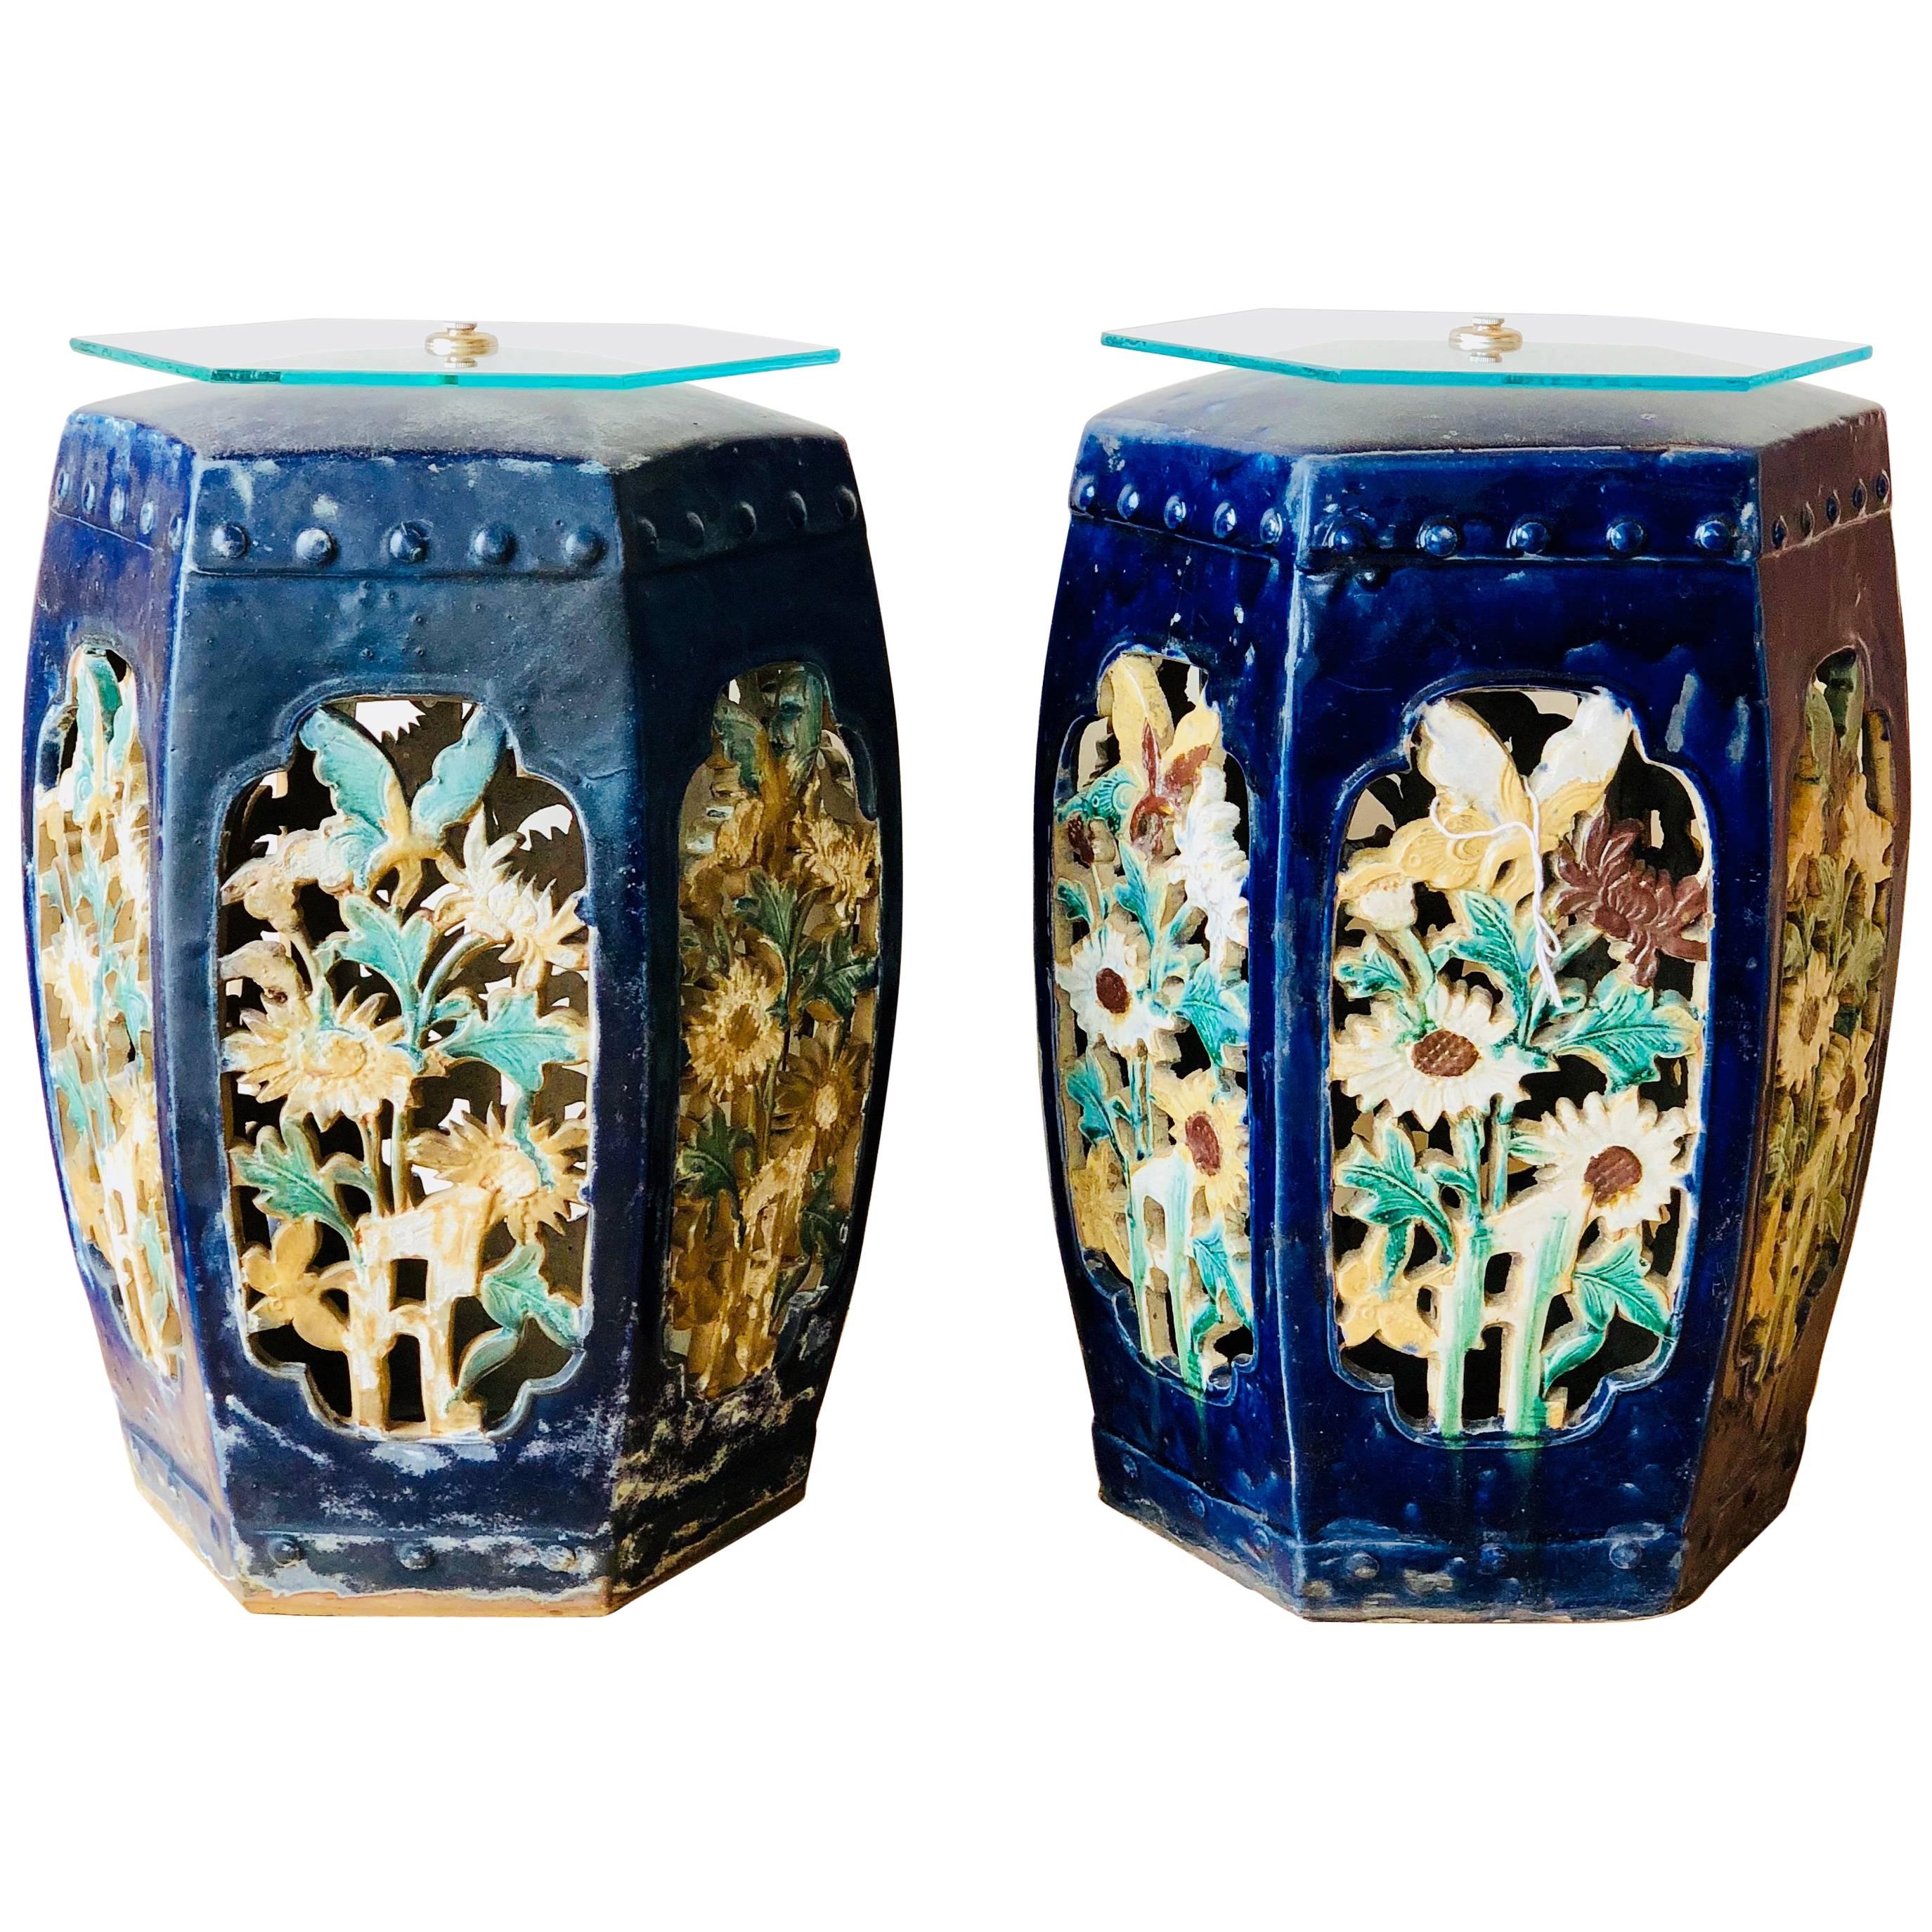 Garden Stools Pair of Blue Chinese Glazed CeramicSide Tables Drink Tables For Sale